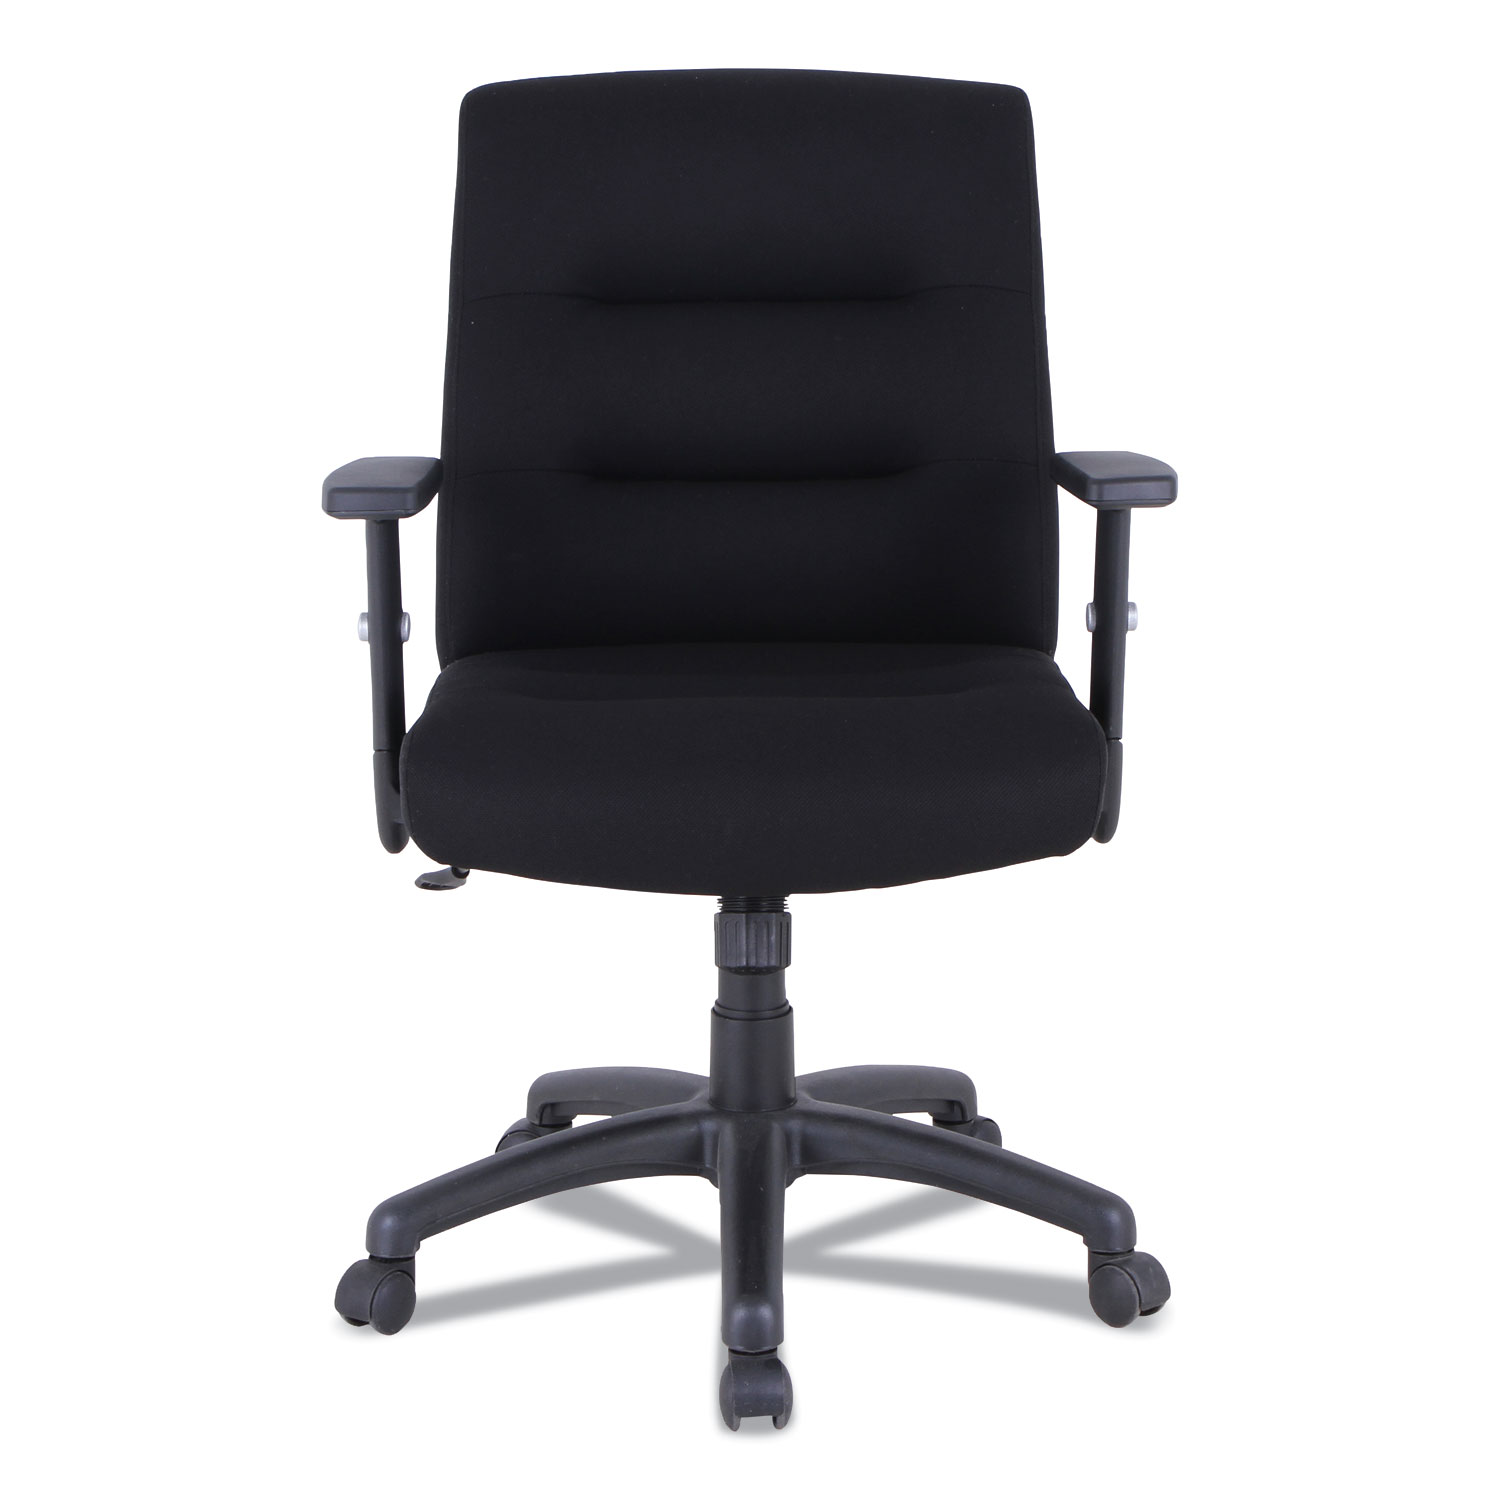 Alera Kesson Series Petite Office Chair, Supports up to 300 lbs., Black Seat/Black Back, Black Base